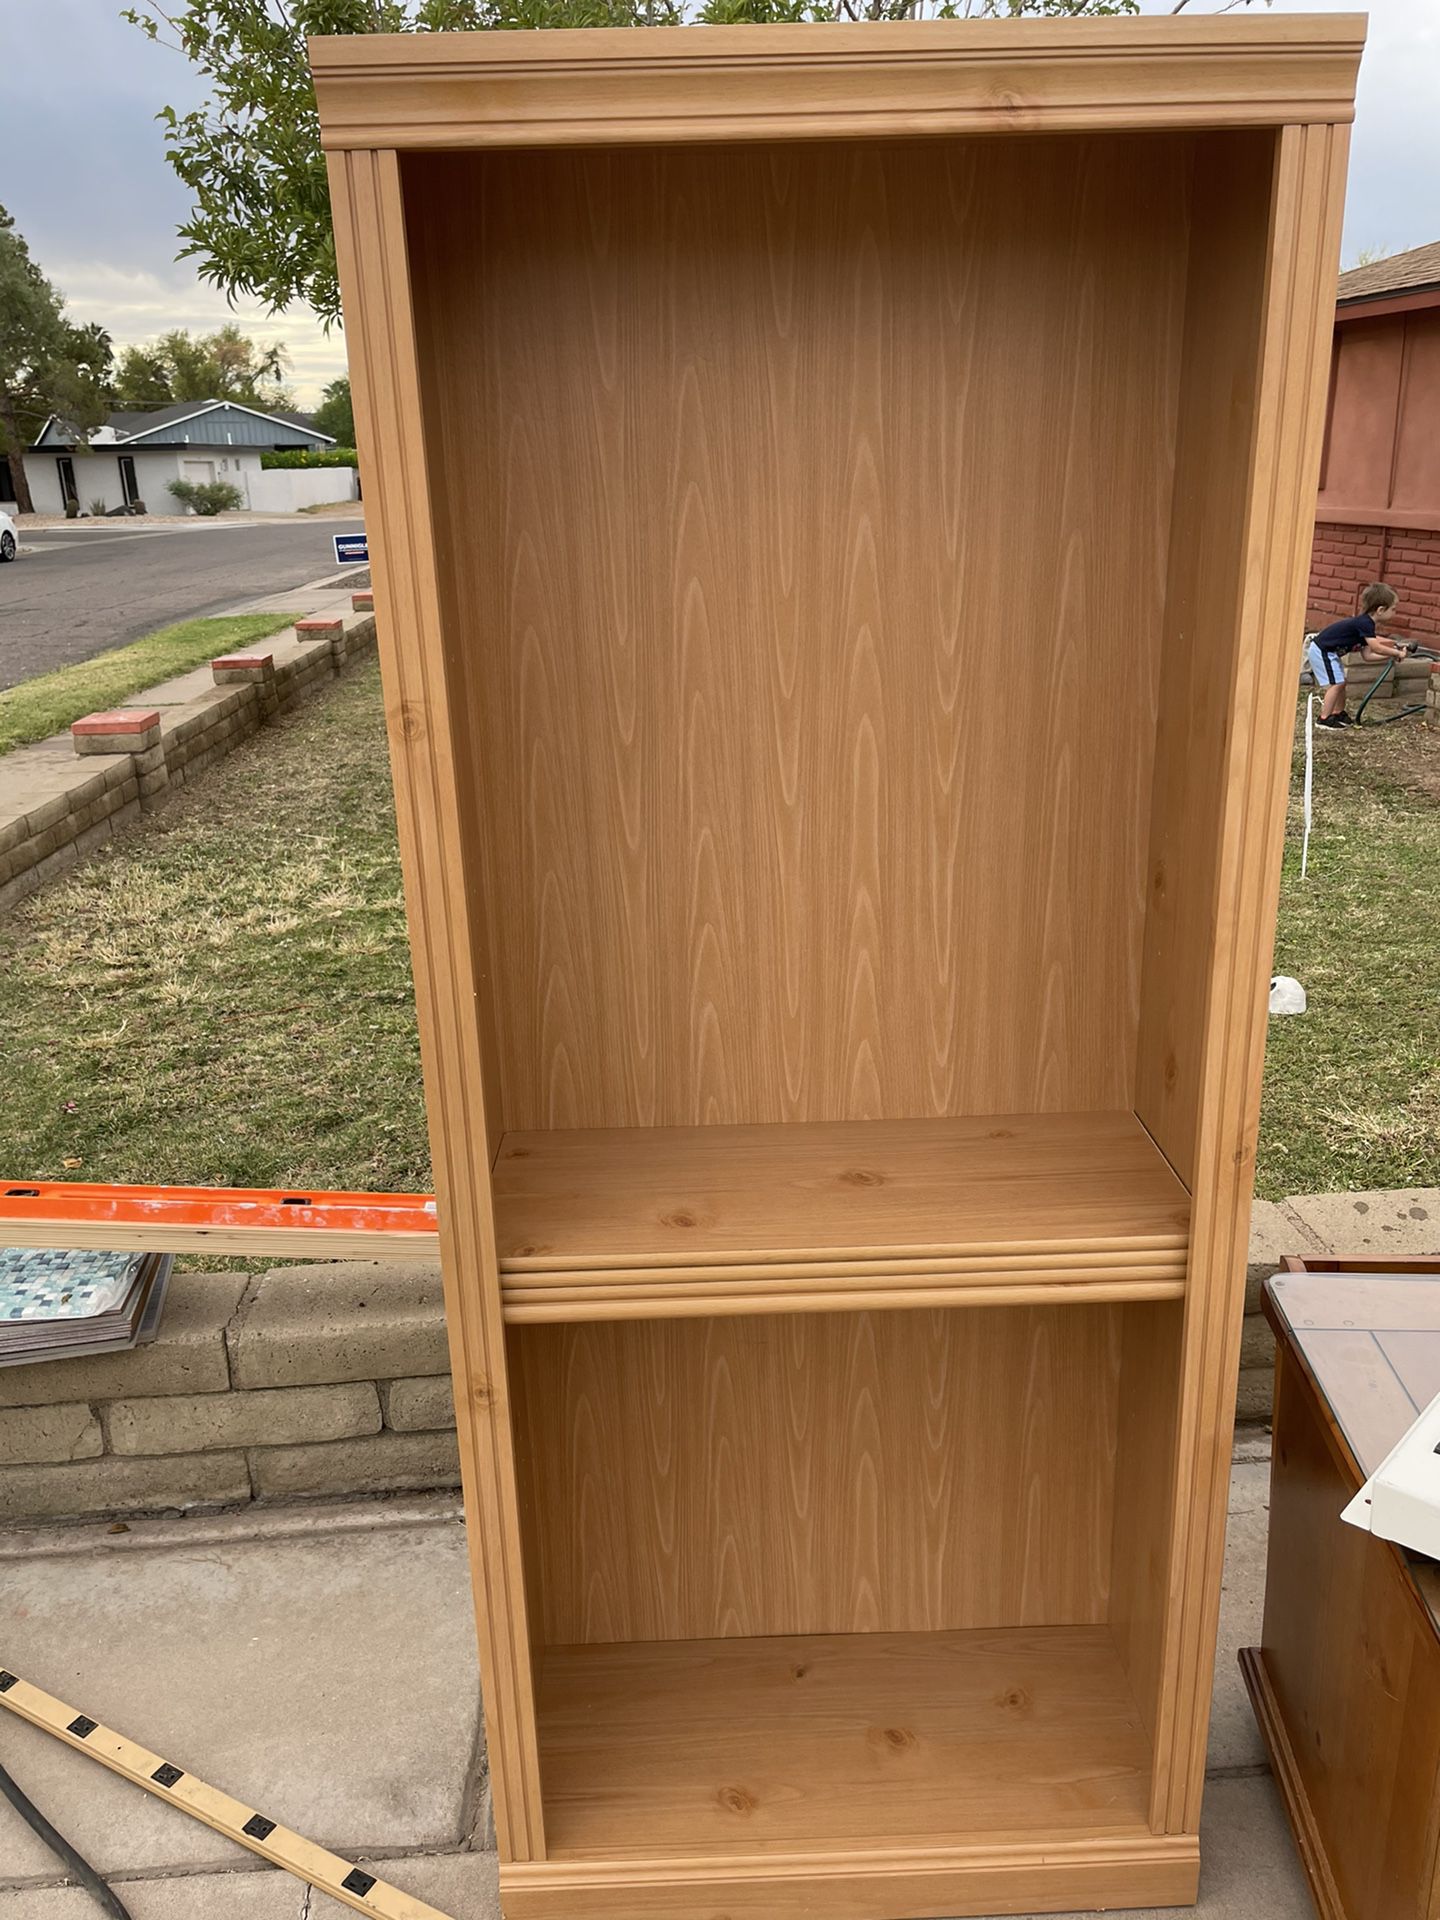 Pine bookshelves. Very good condition 6’ high x 2.5’ wide